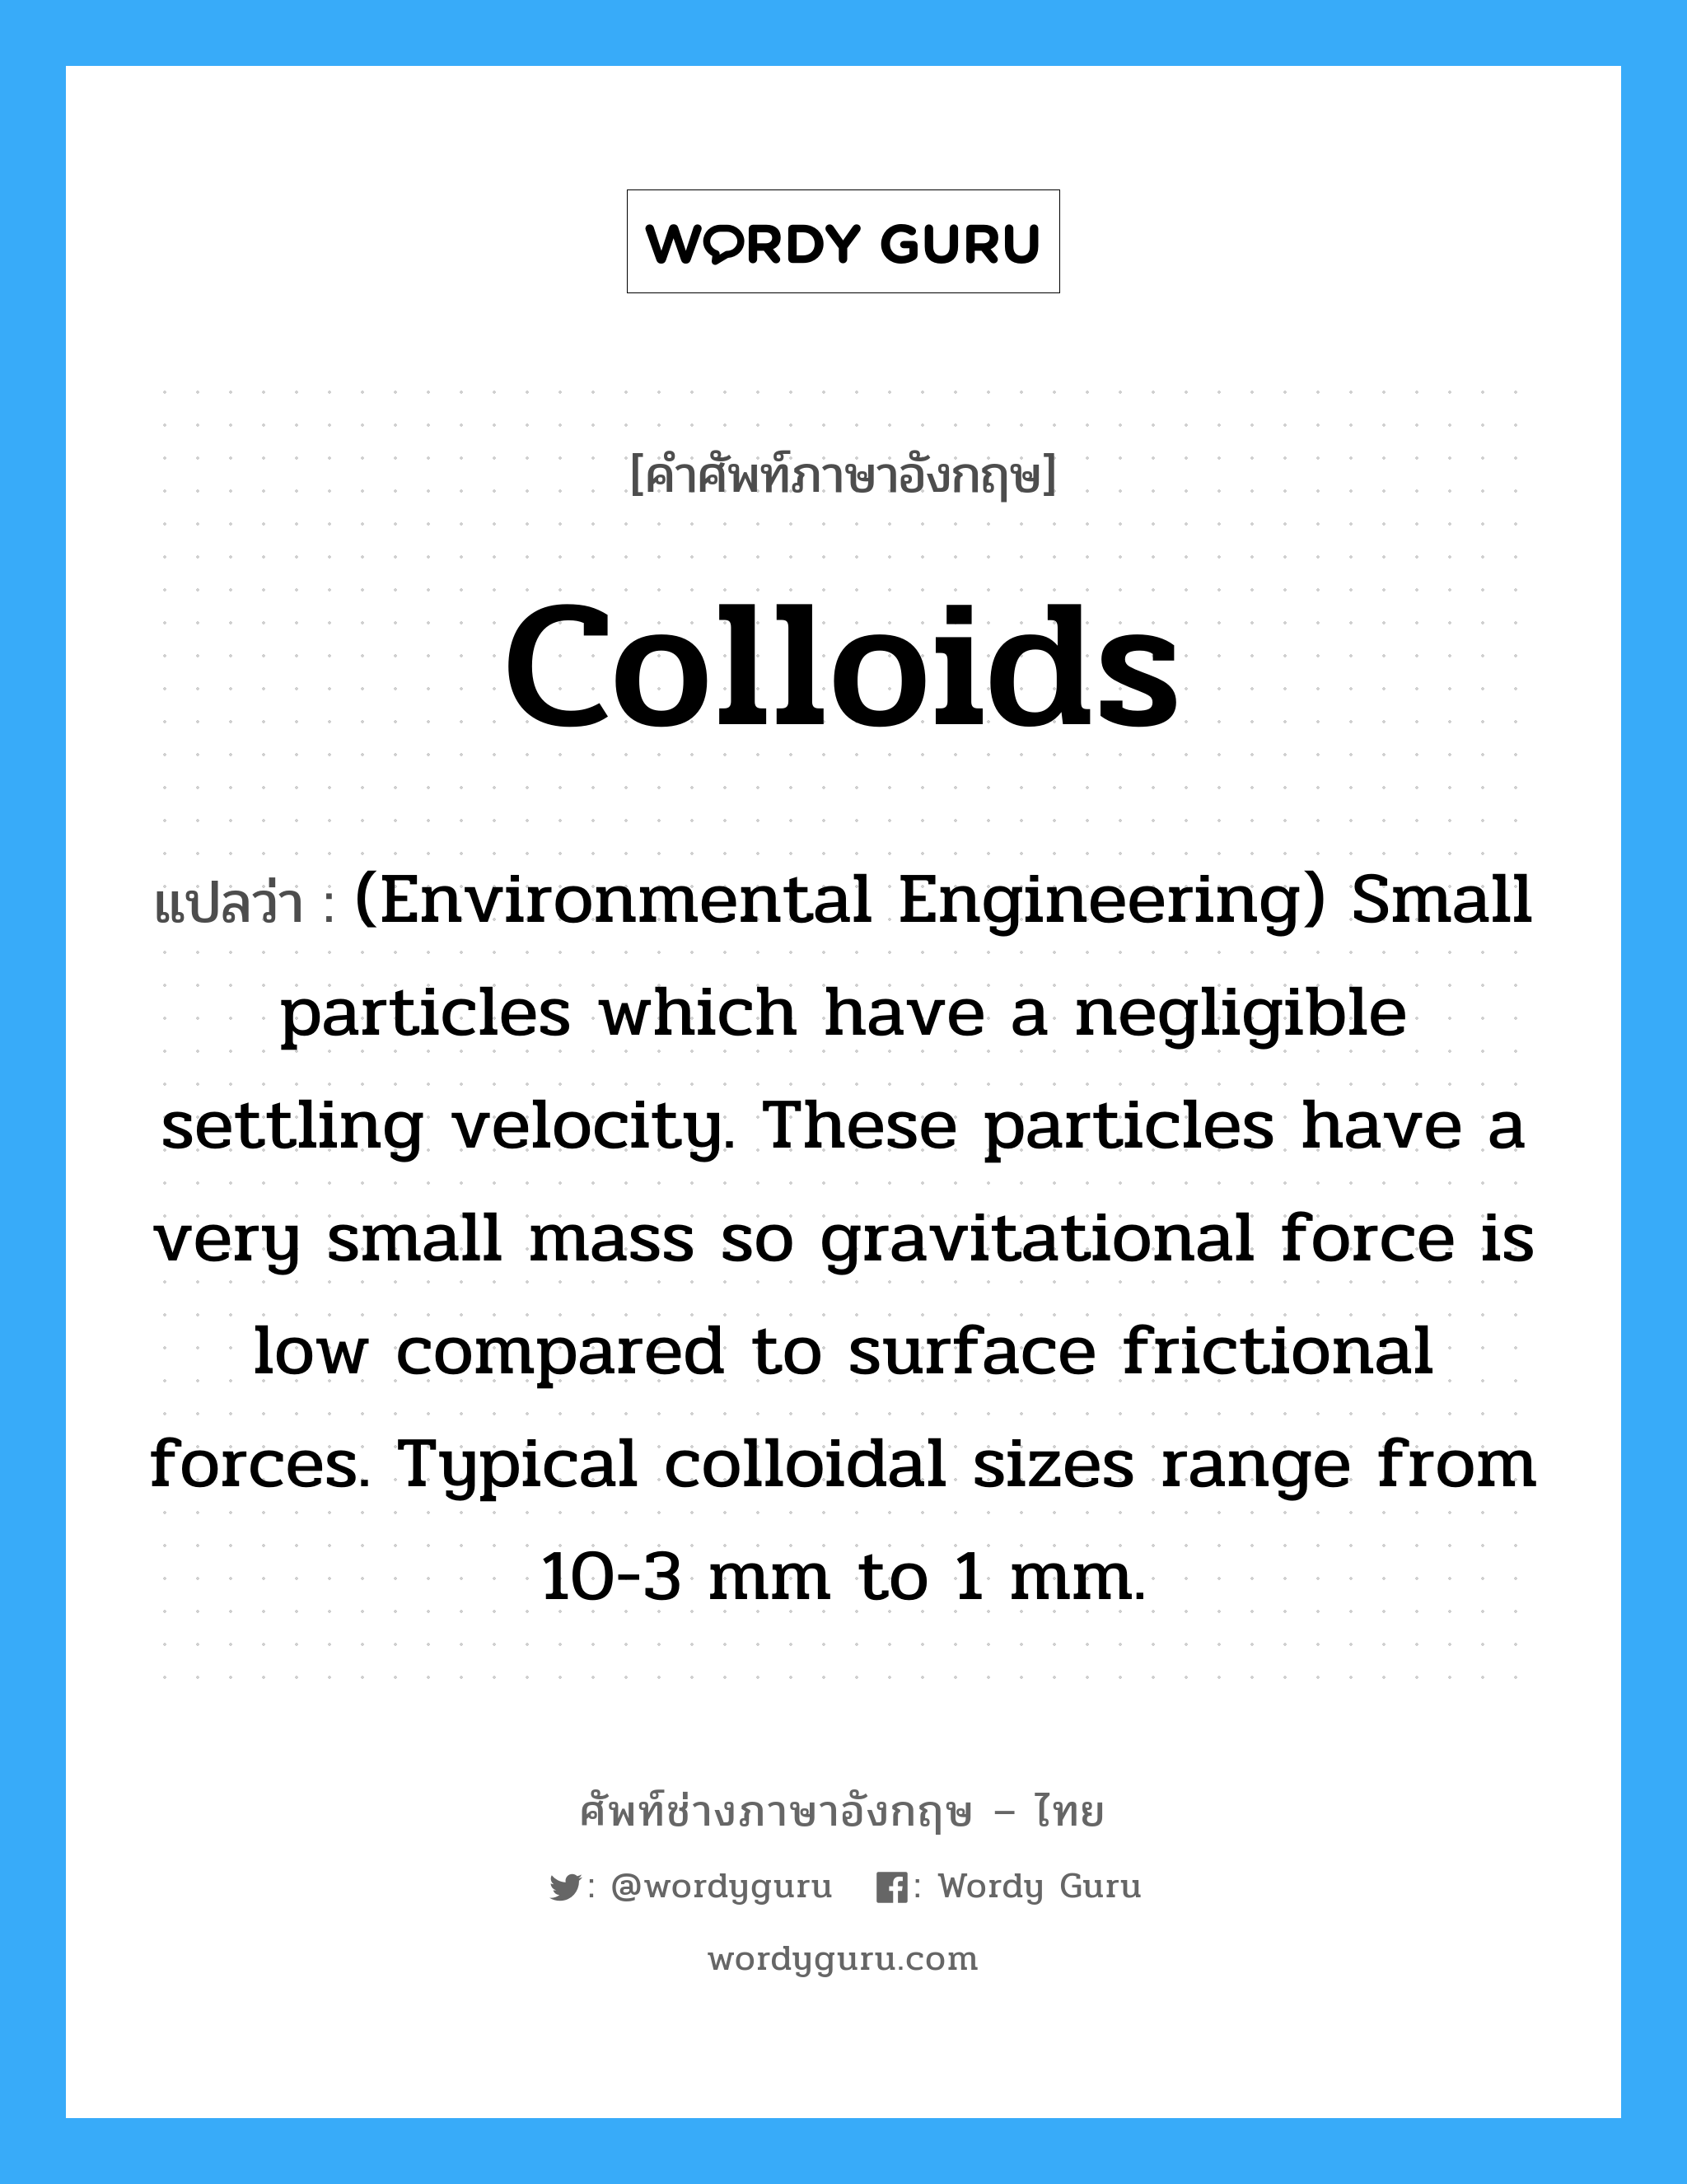 Colloids แปลว่า?, คำศัพท์ช่างภาษาอังกฤษ - ไทย Colloids คำศัพท์ภาษาอังกฤษ Colloids แปลว่า (Environmental Engineering) Small particles which have a negligible settling velocity. These particles have a very small mass so gravitational force is low compared to surface frictional forces. Typical colloidal sizes range from 10-3 mm to 1 mm.